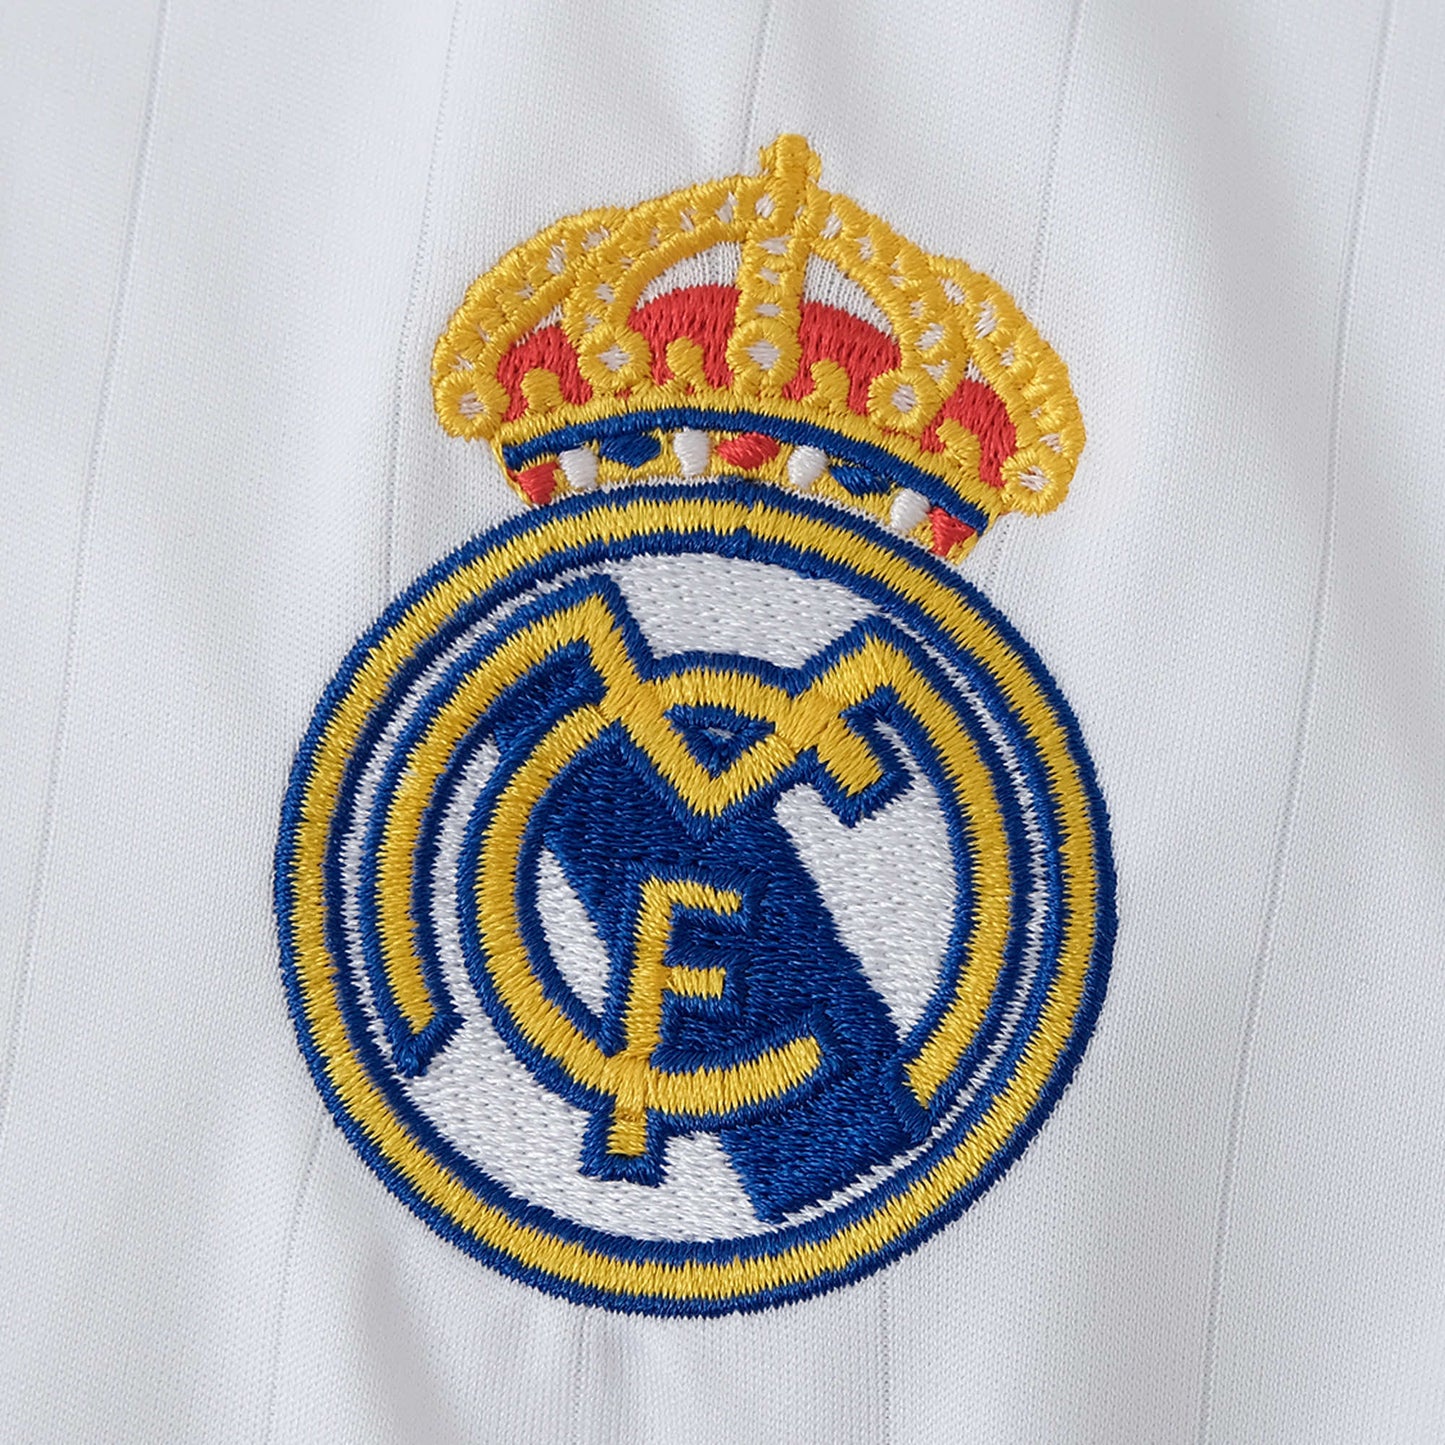 Real Madrid 2006/07 Home Jersey